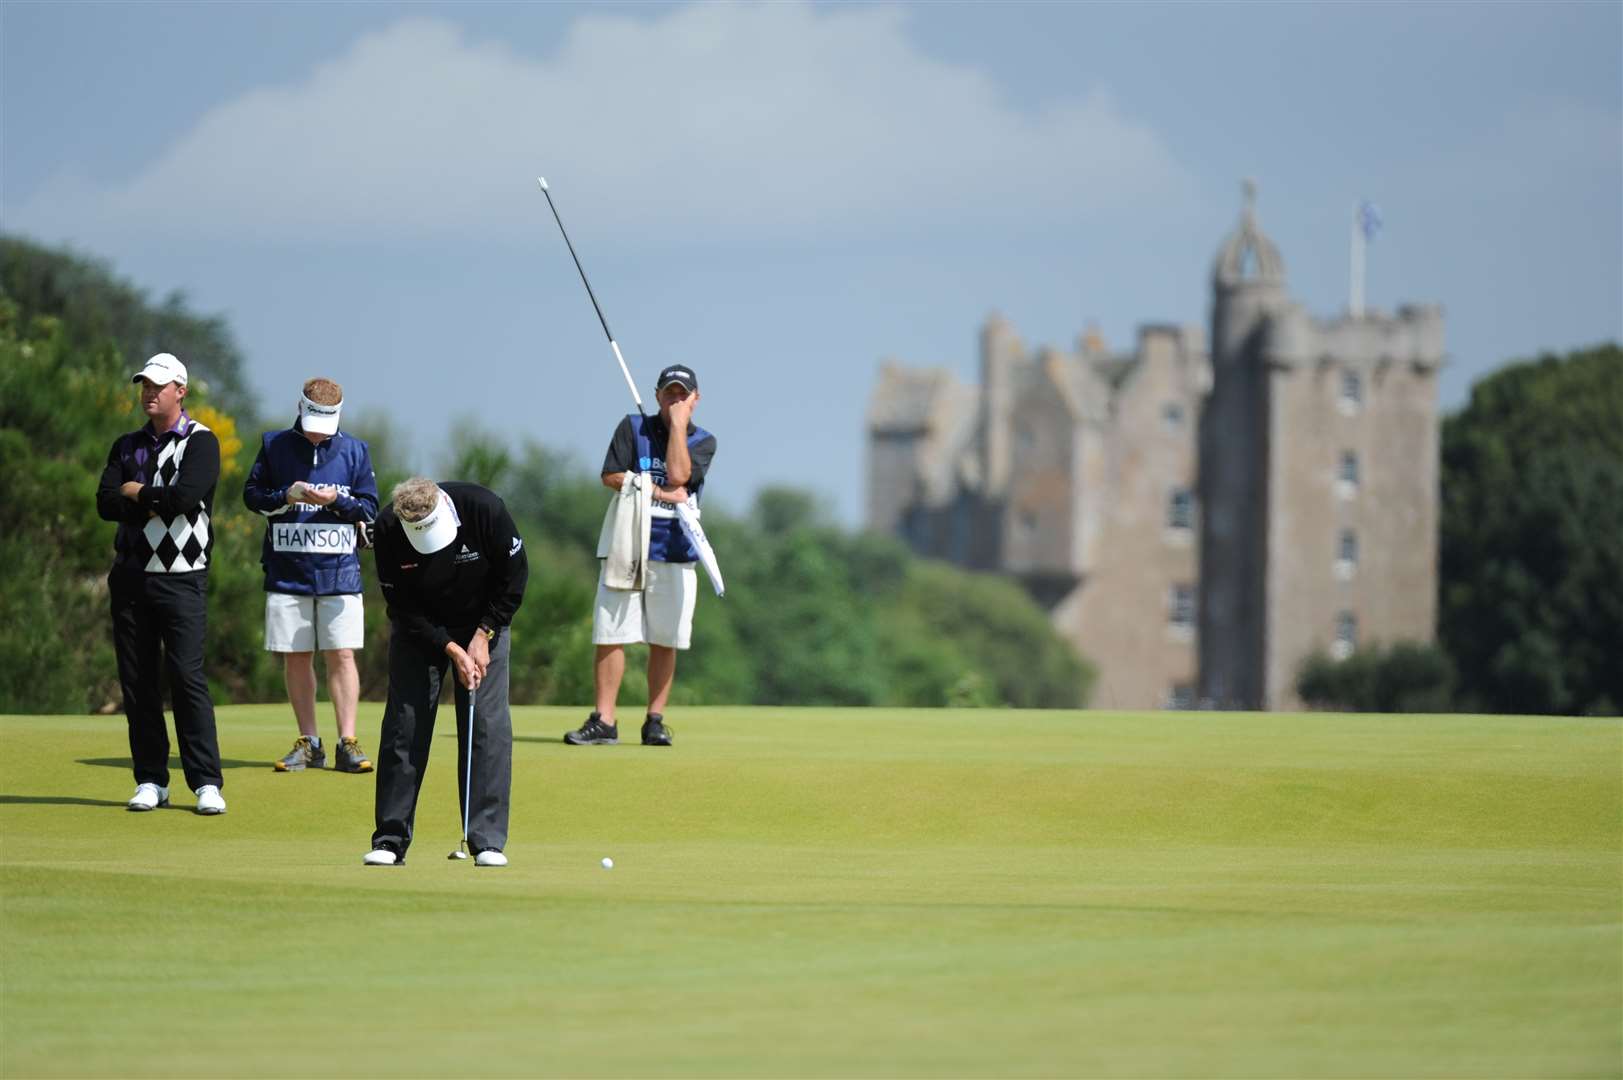 Colin Montgomerie on the green with the 17th century castle in the background.